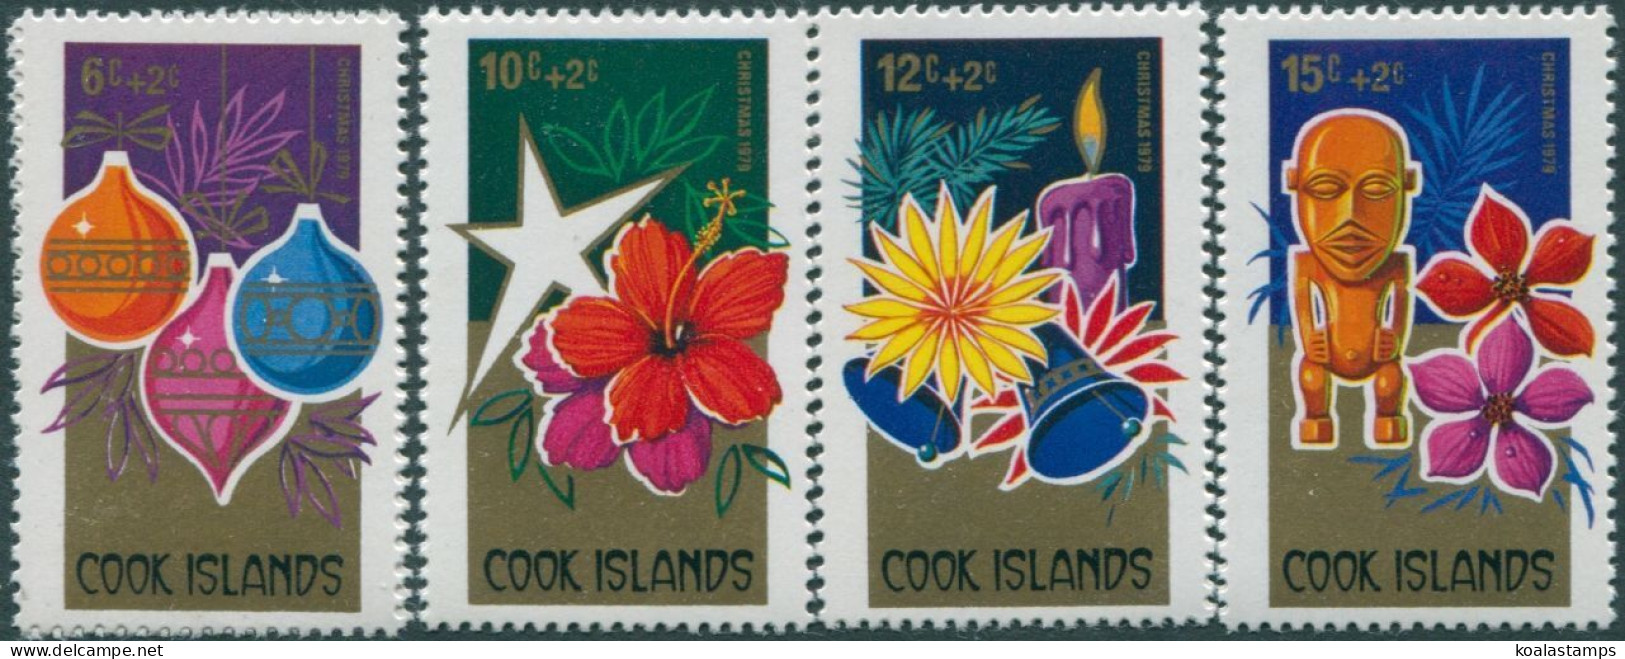 Cook Islands 1979 SG667-670 Christmas Surcharges Set MNH - Cook Islands